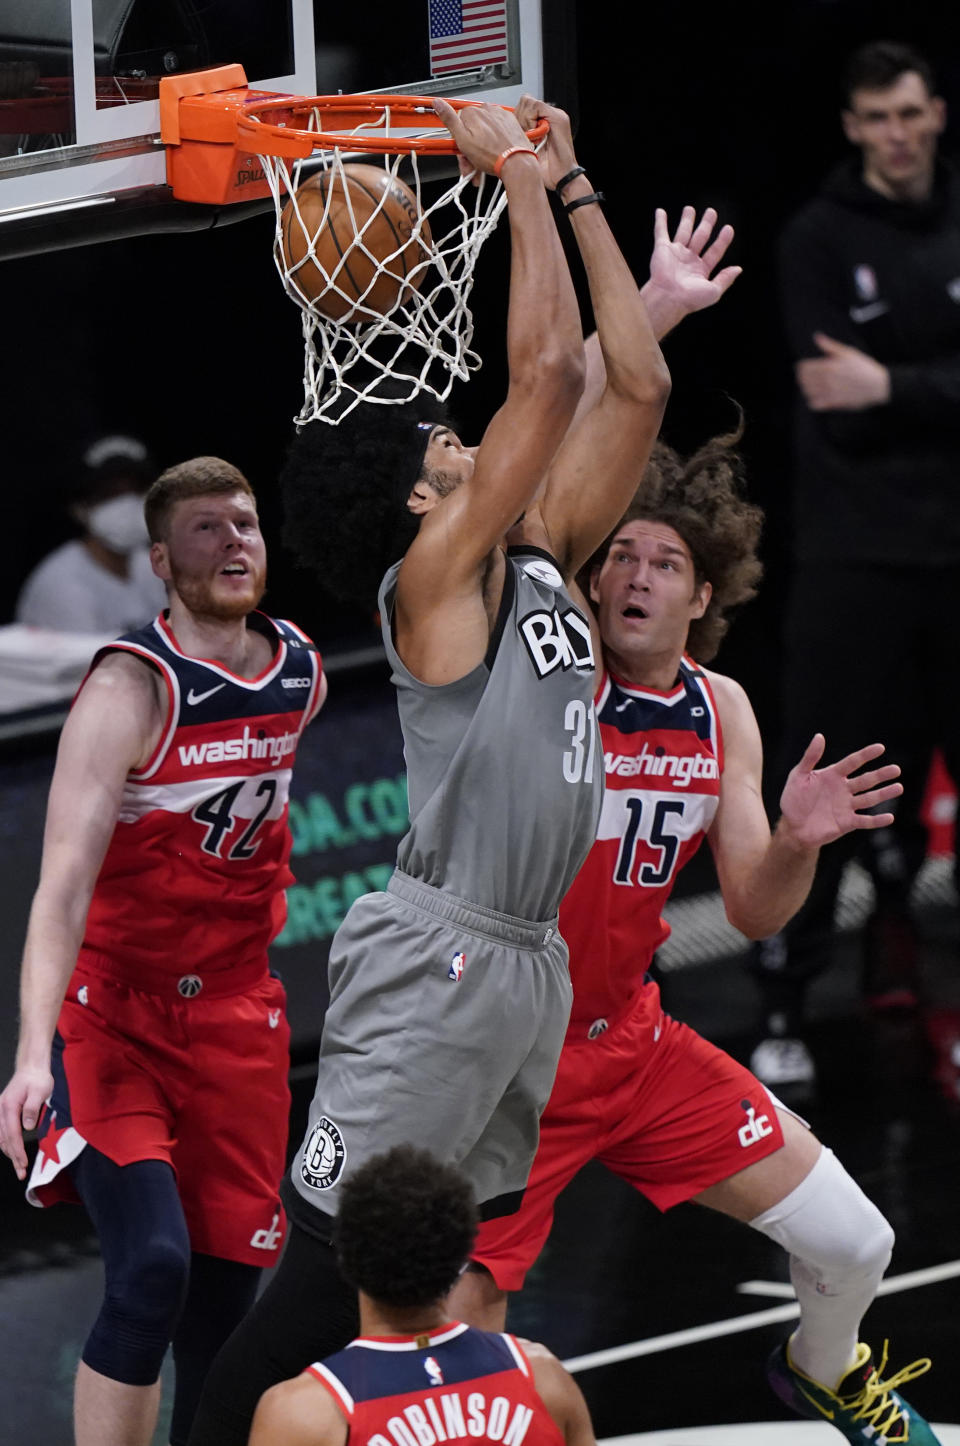 Brooklyn Nets center Jarrett Allen, center, executes a backward dunk with Washington Wizards Davis Bertans, left, and Robin Lopez, right, defending during the second quarter of an NBA basketball game, Sunday, Jan. 3, 2021, in New York. (AP Photo/Kathy Willens)